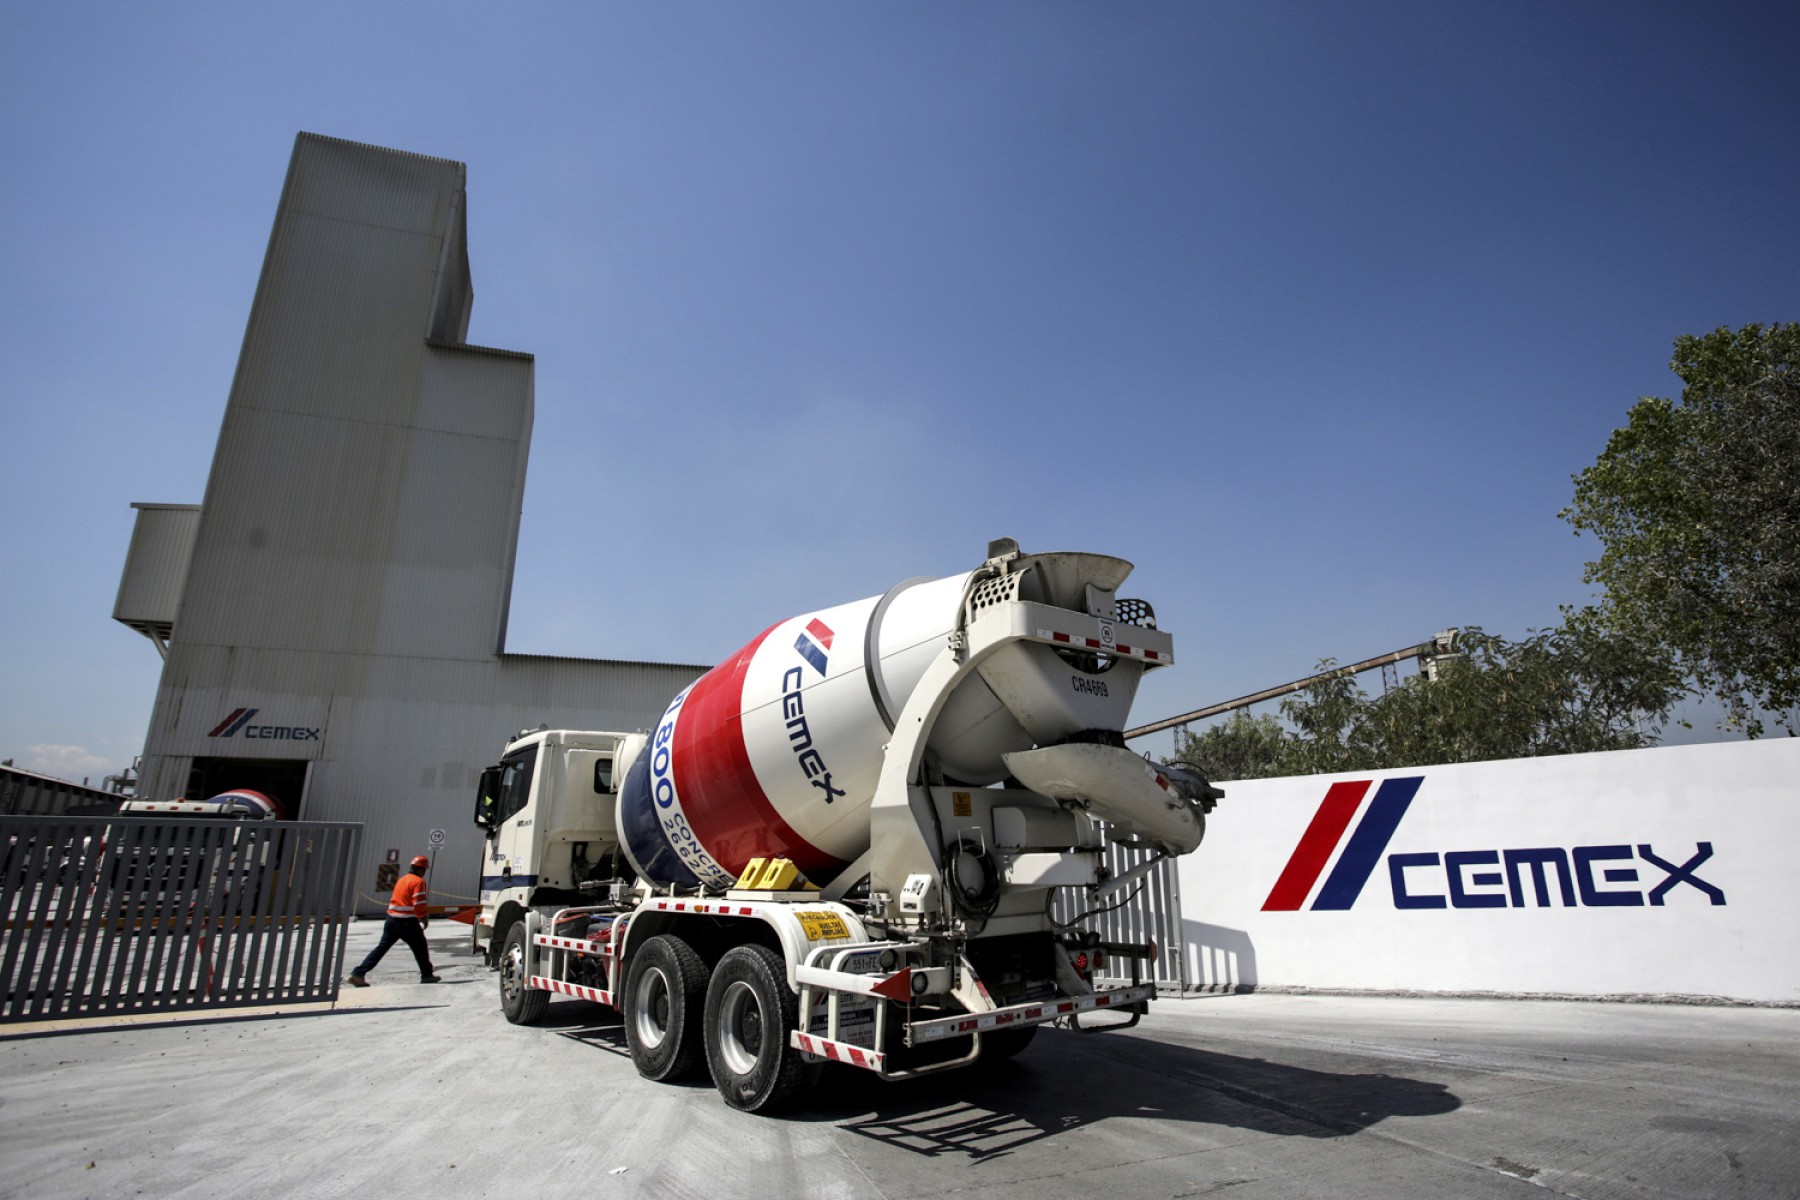 CEMEX implements technology to reduce carbon emissions